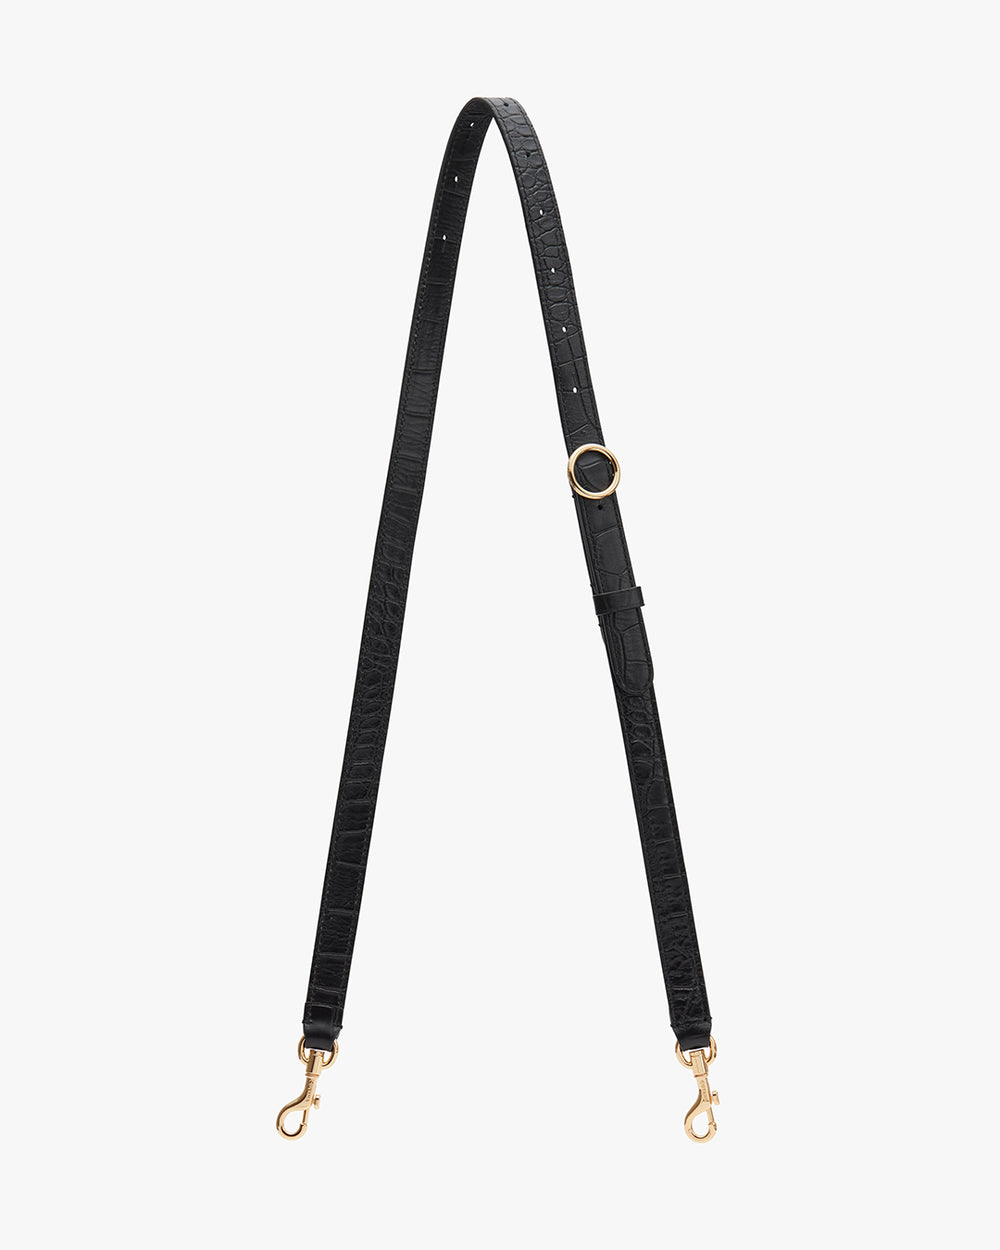 Adjustable strap with buckle and two clasps at ends.